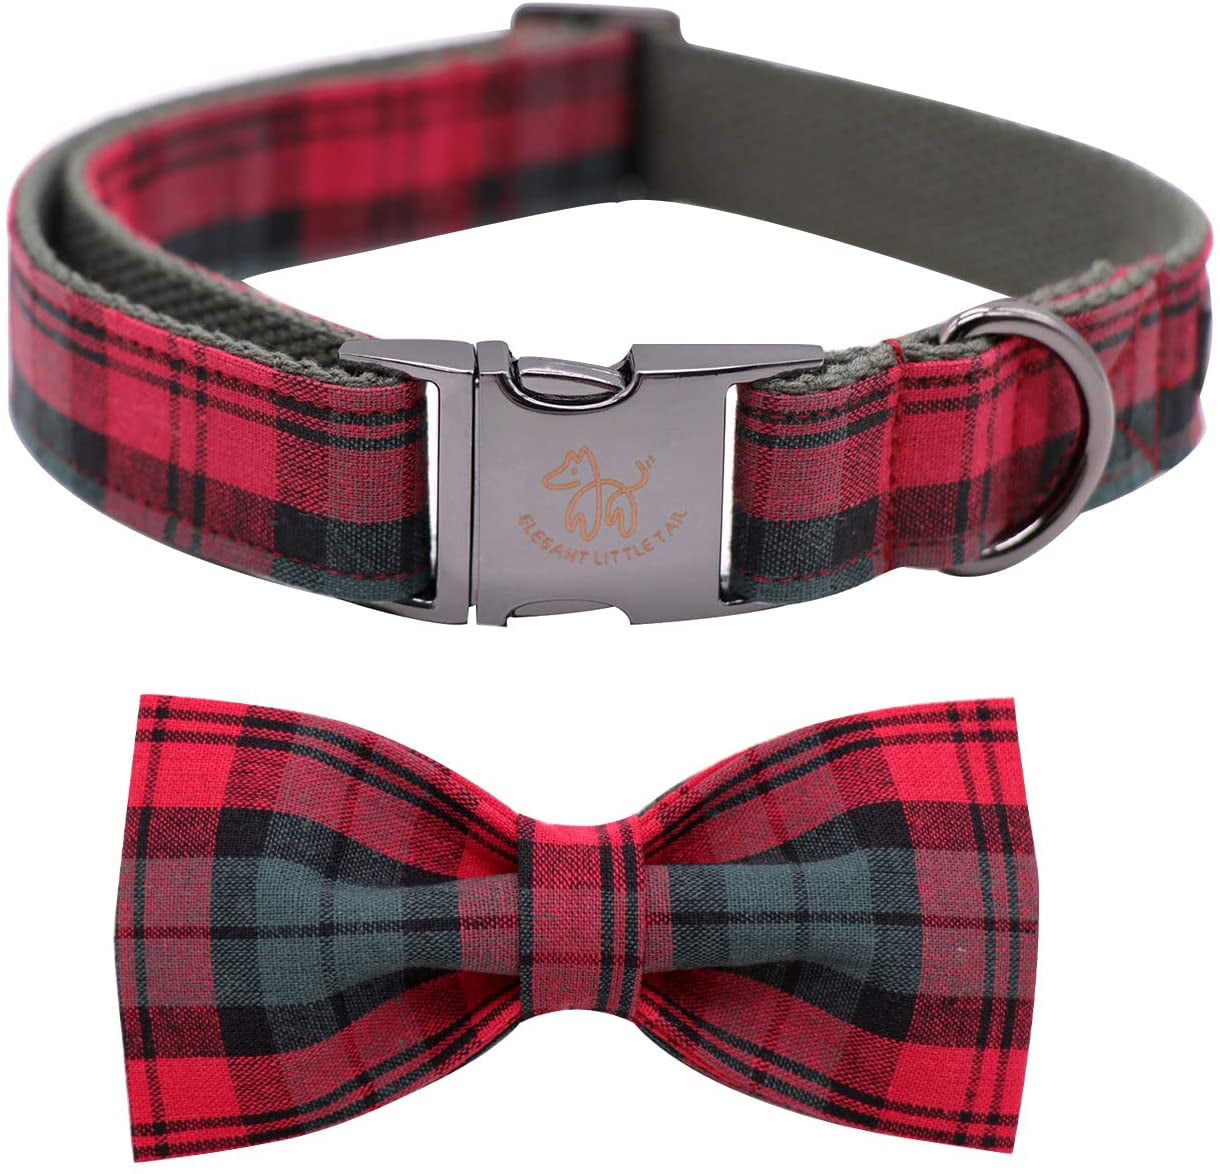 Adjustable Dog Collars for Small Medium Large Dogs and Cats Bowtie Dog Collar Elegant little tail Dog Collar with Bow Cotton & Webbing 